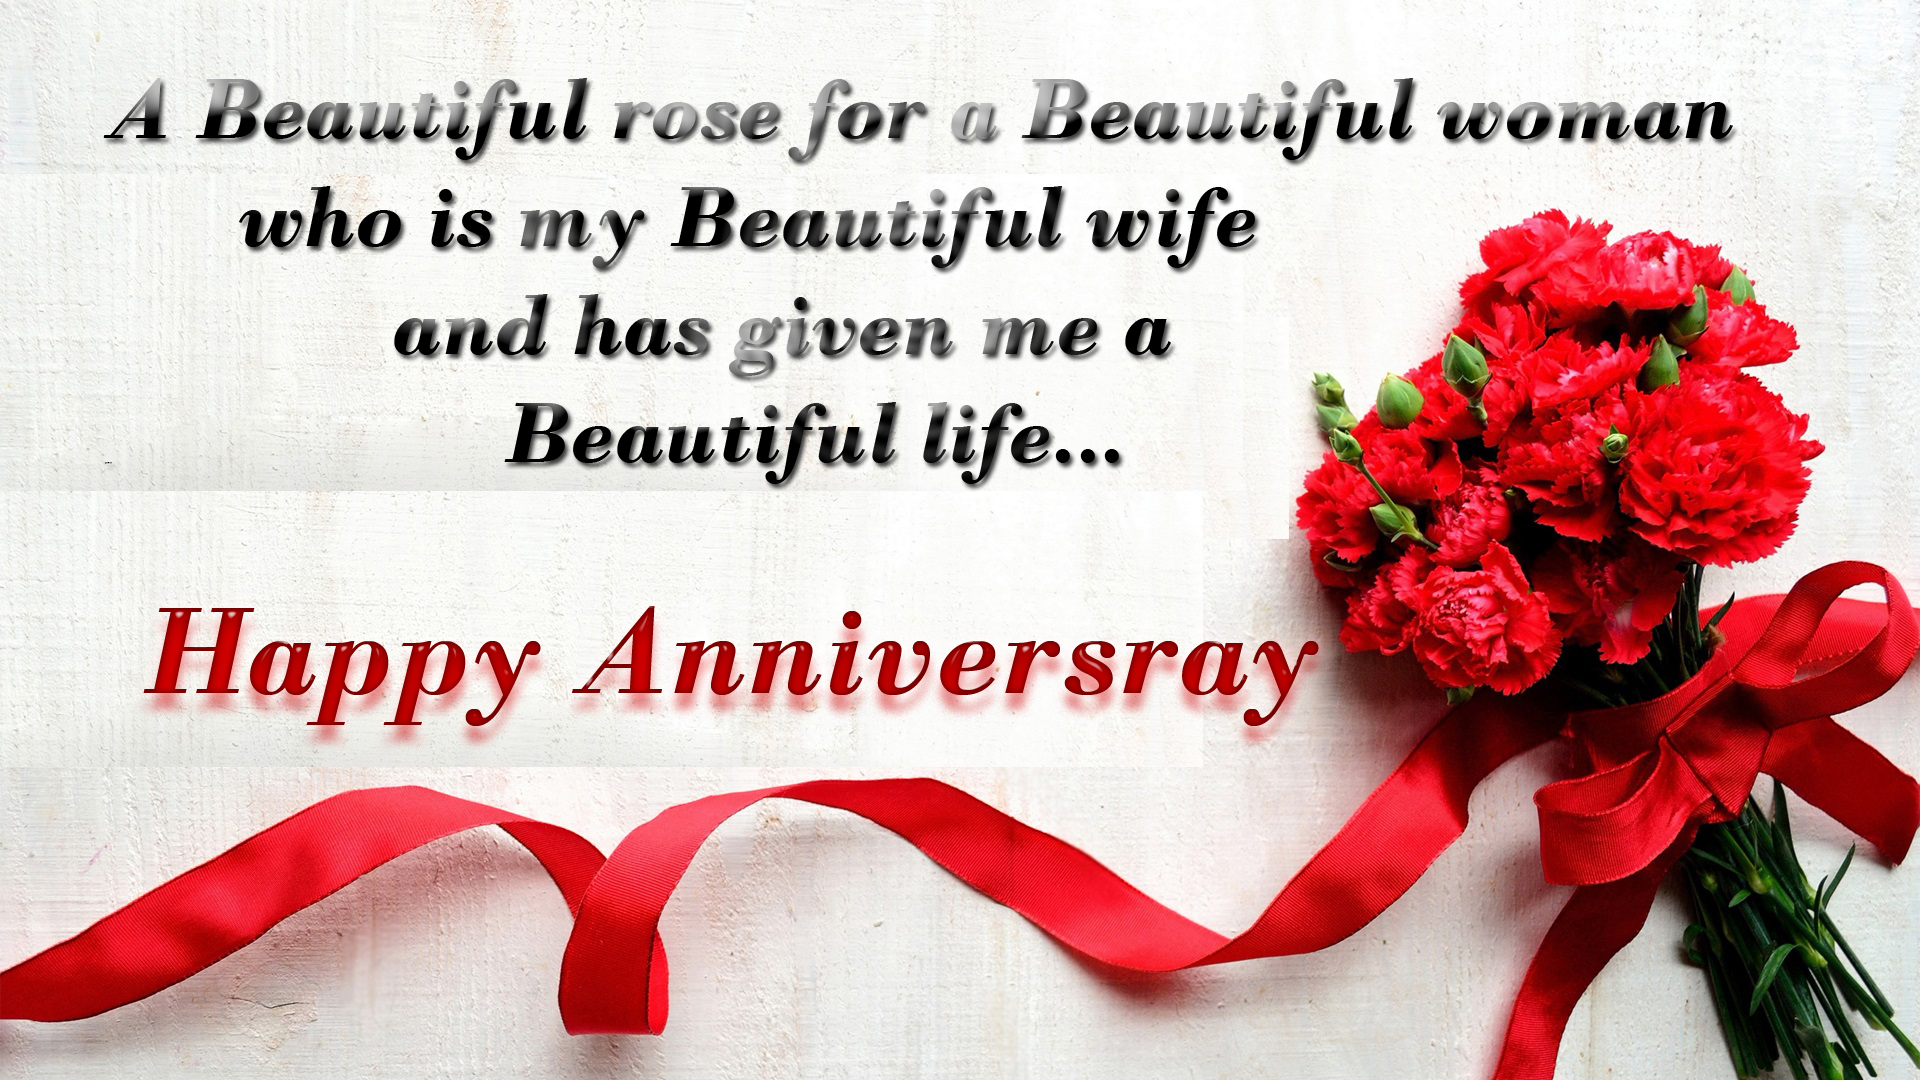 image for anniversary wishes for wife 2018